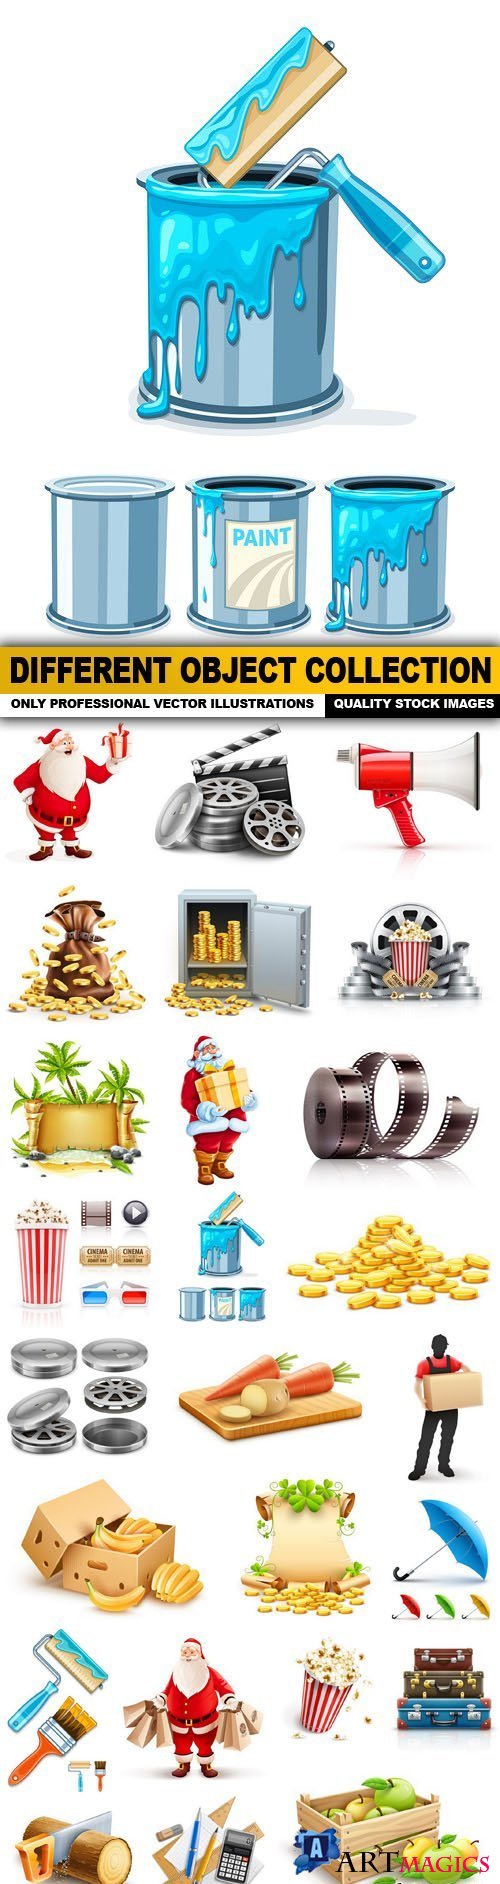 Different Object Collection - 25 Vector